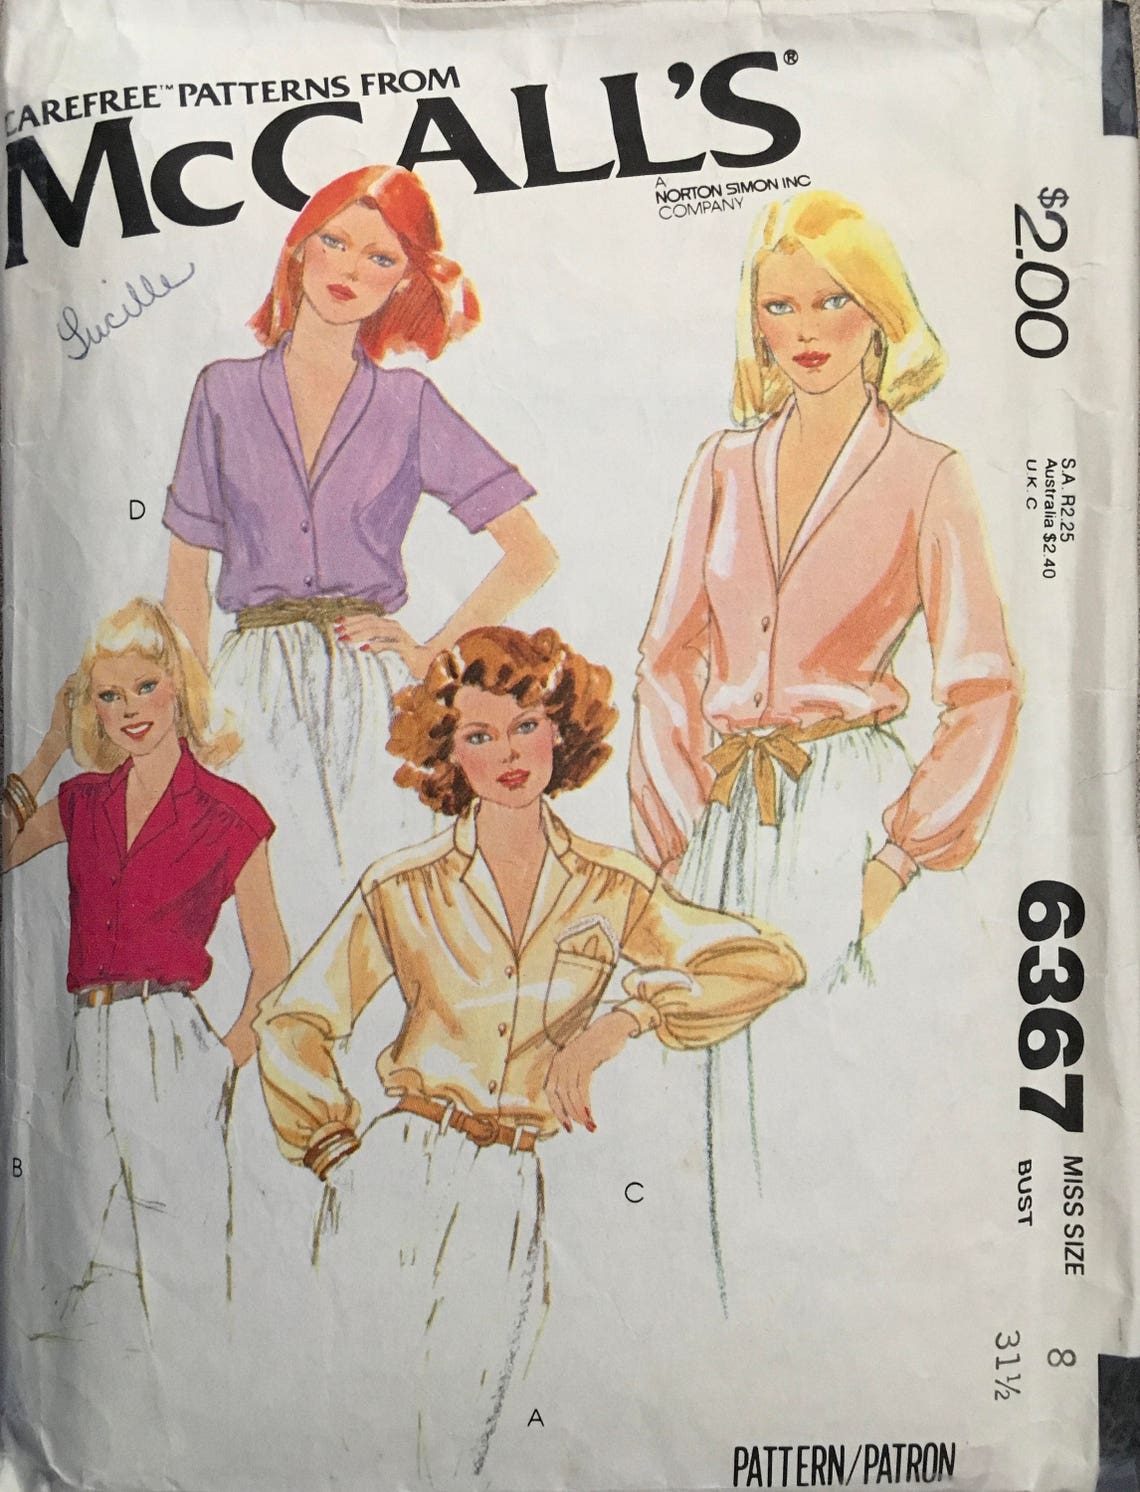 Mccall's 6367 Sewing Pattern vintage CUT | Etsy